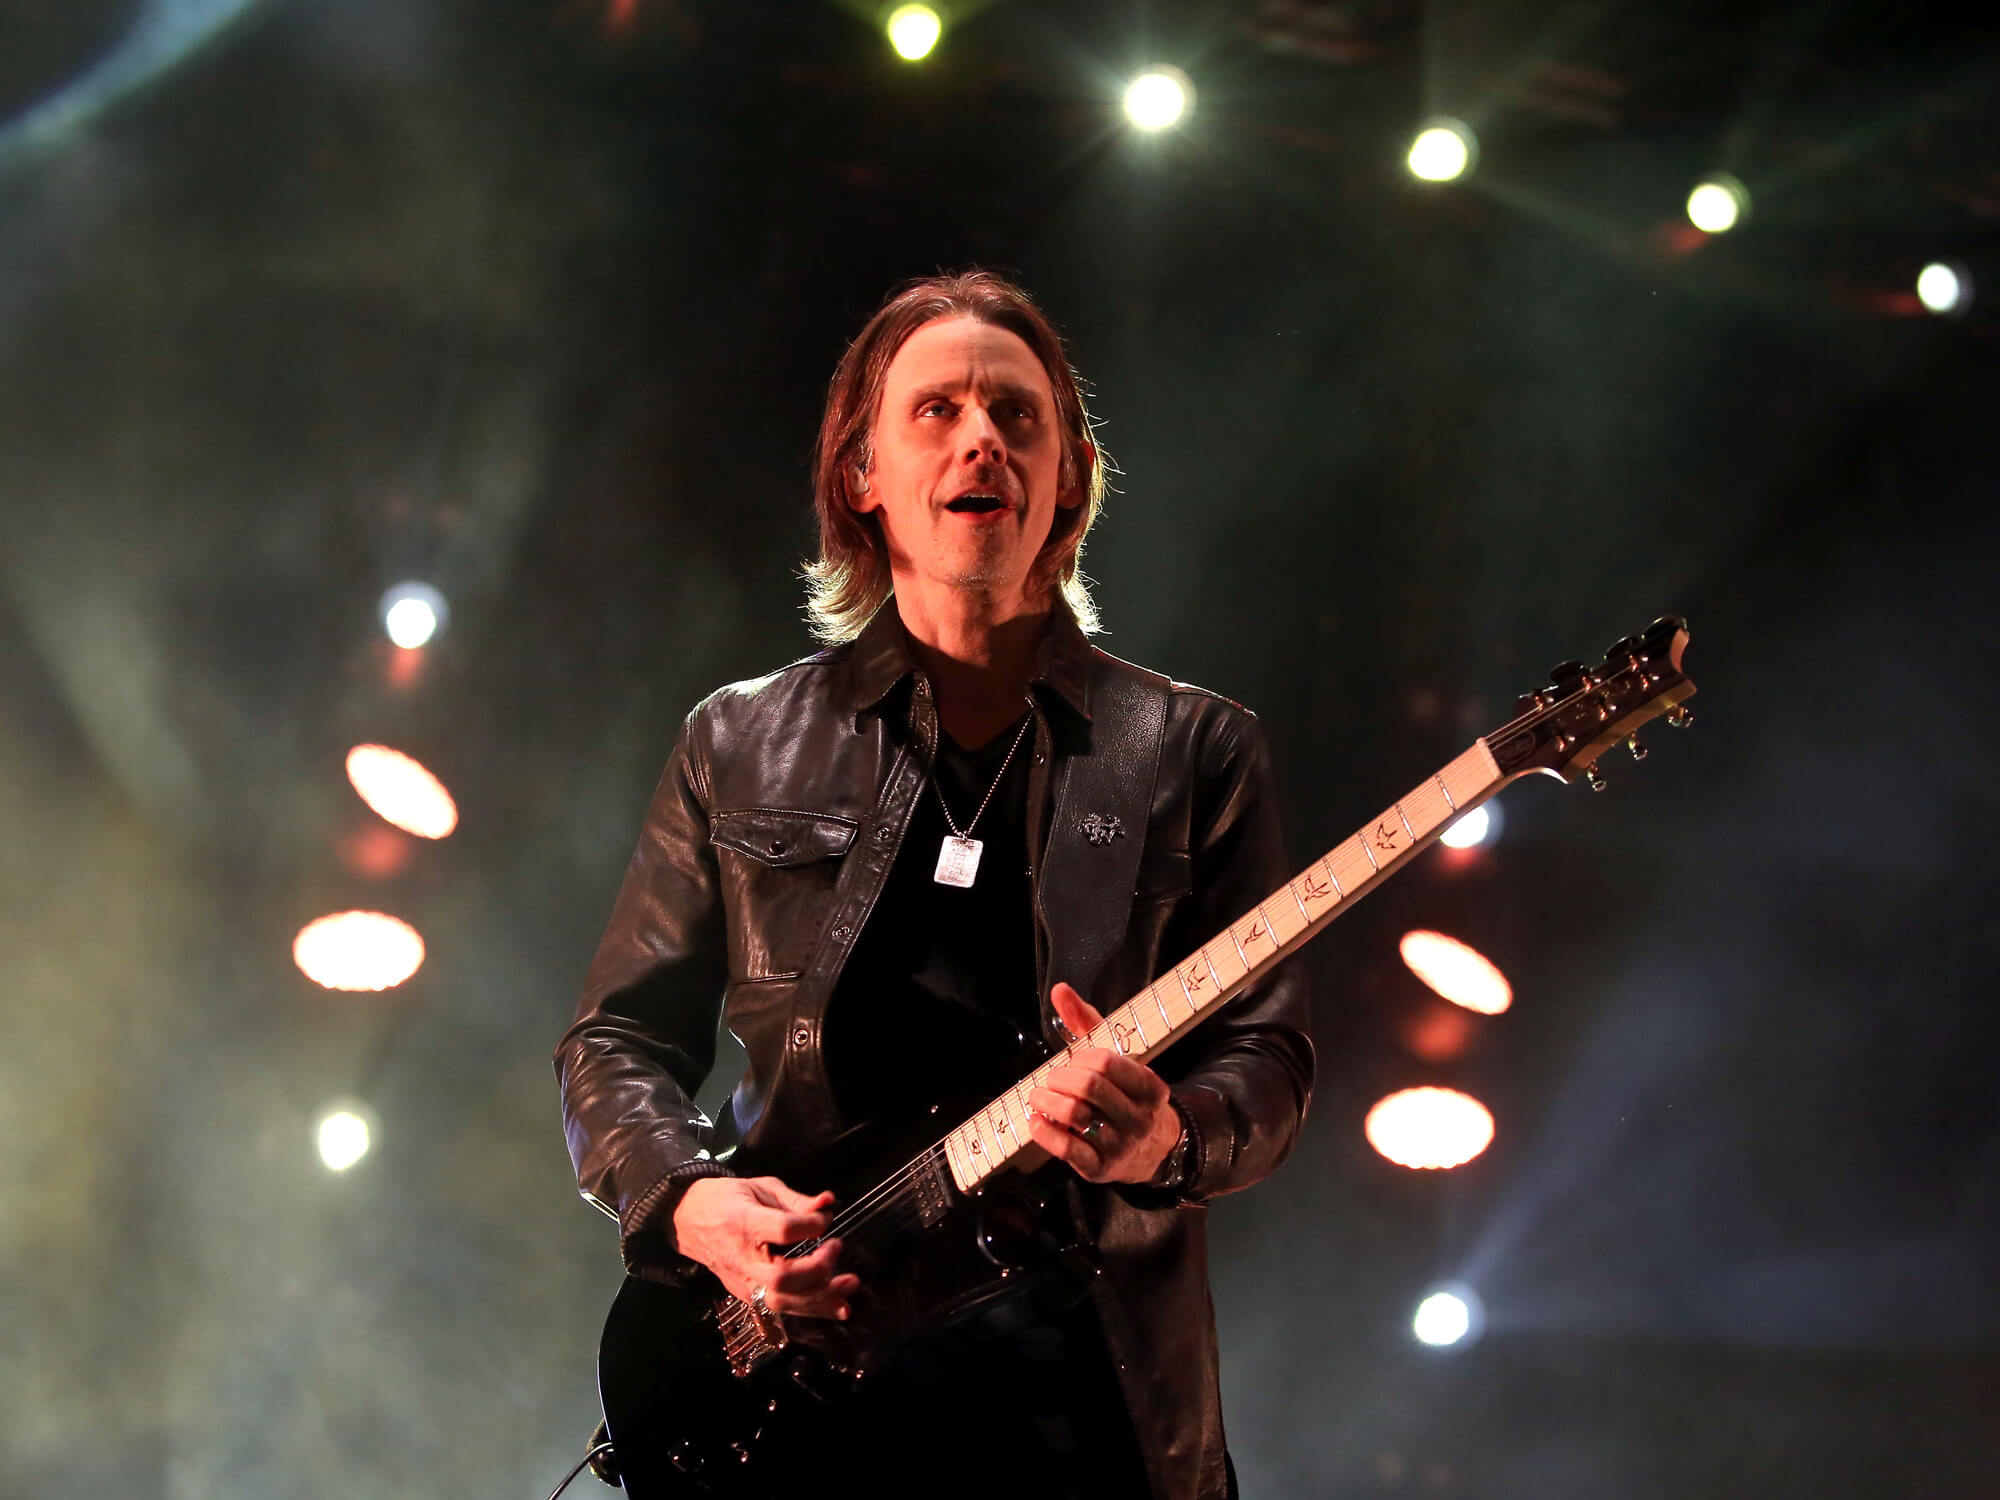 Myles Kennedy performing live